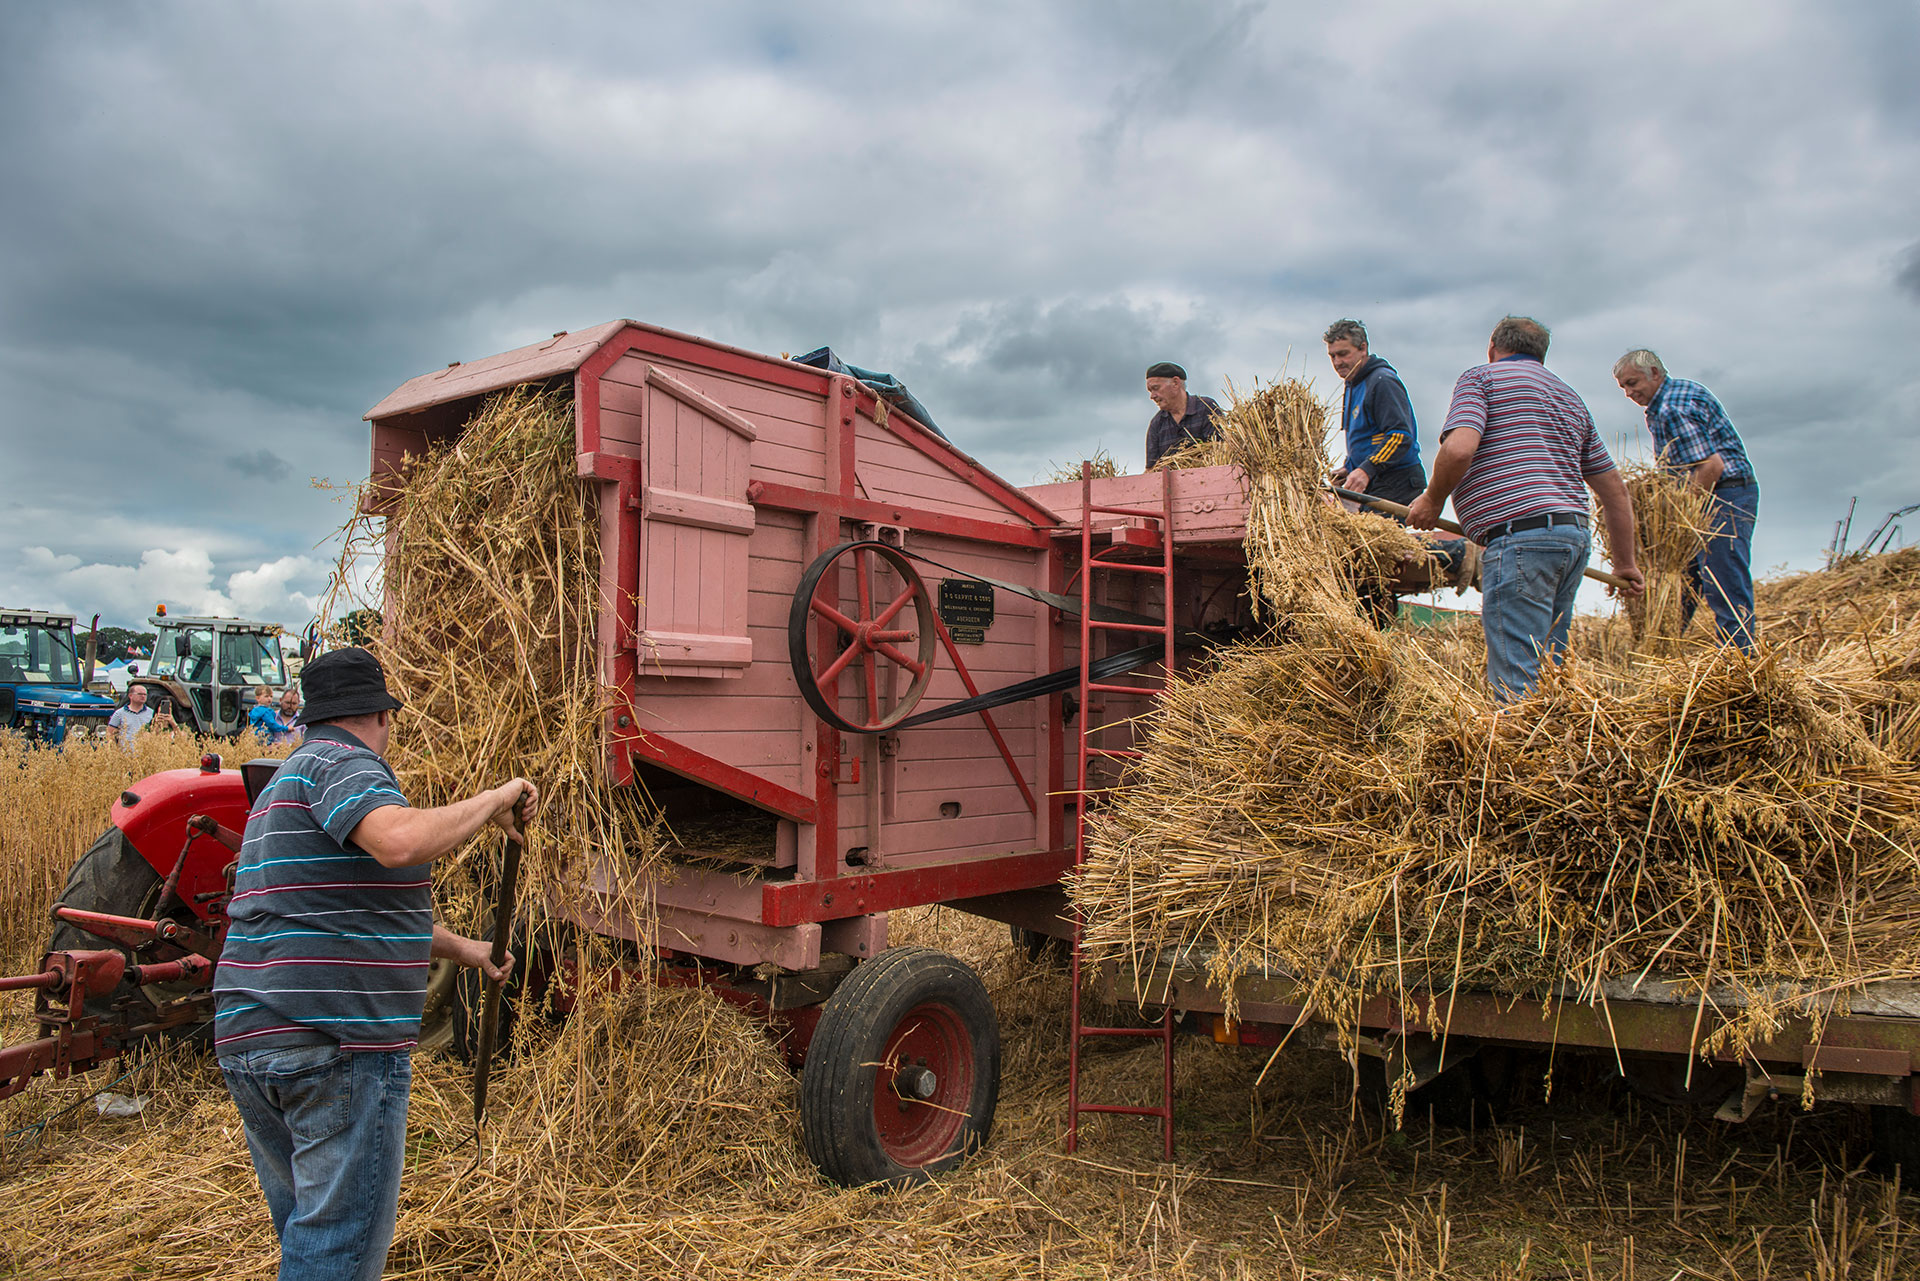 Treshing scene at the Ossory Agricultural Show 2019